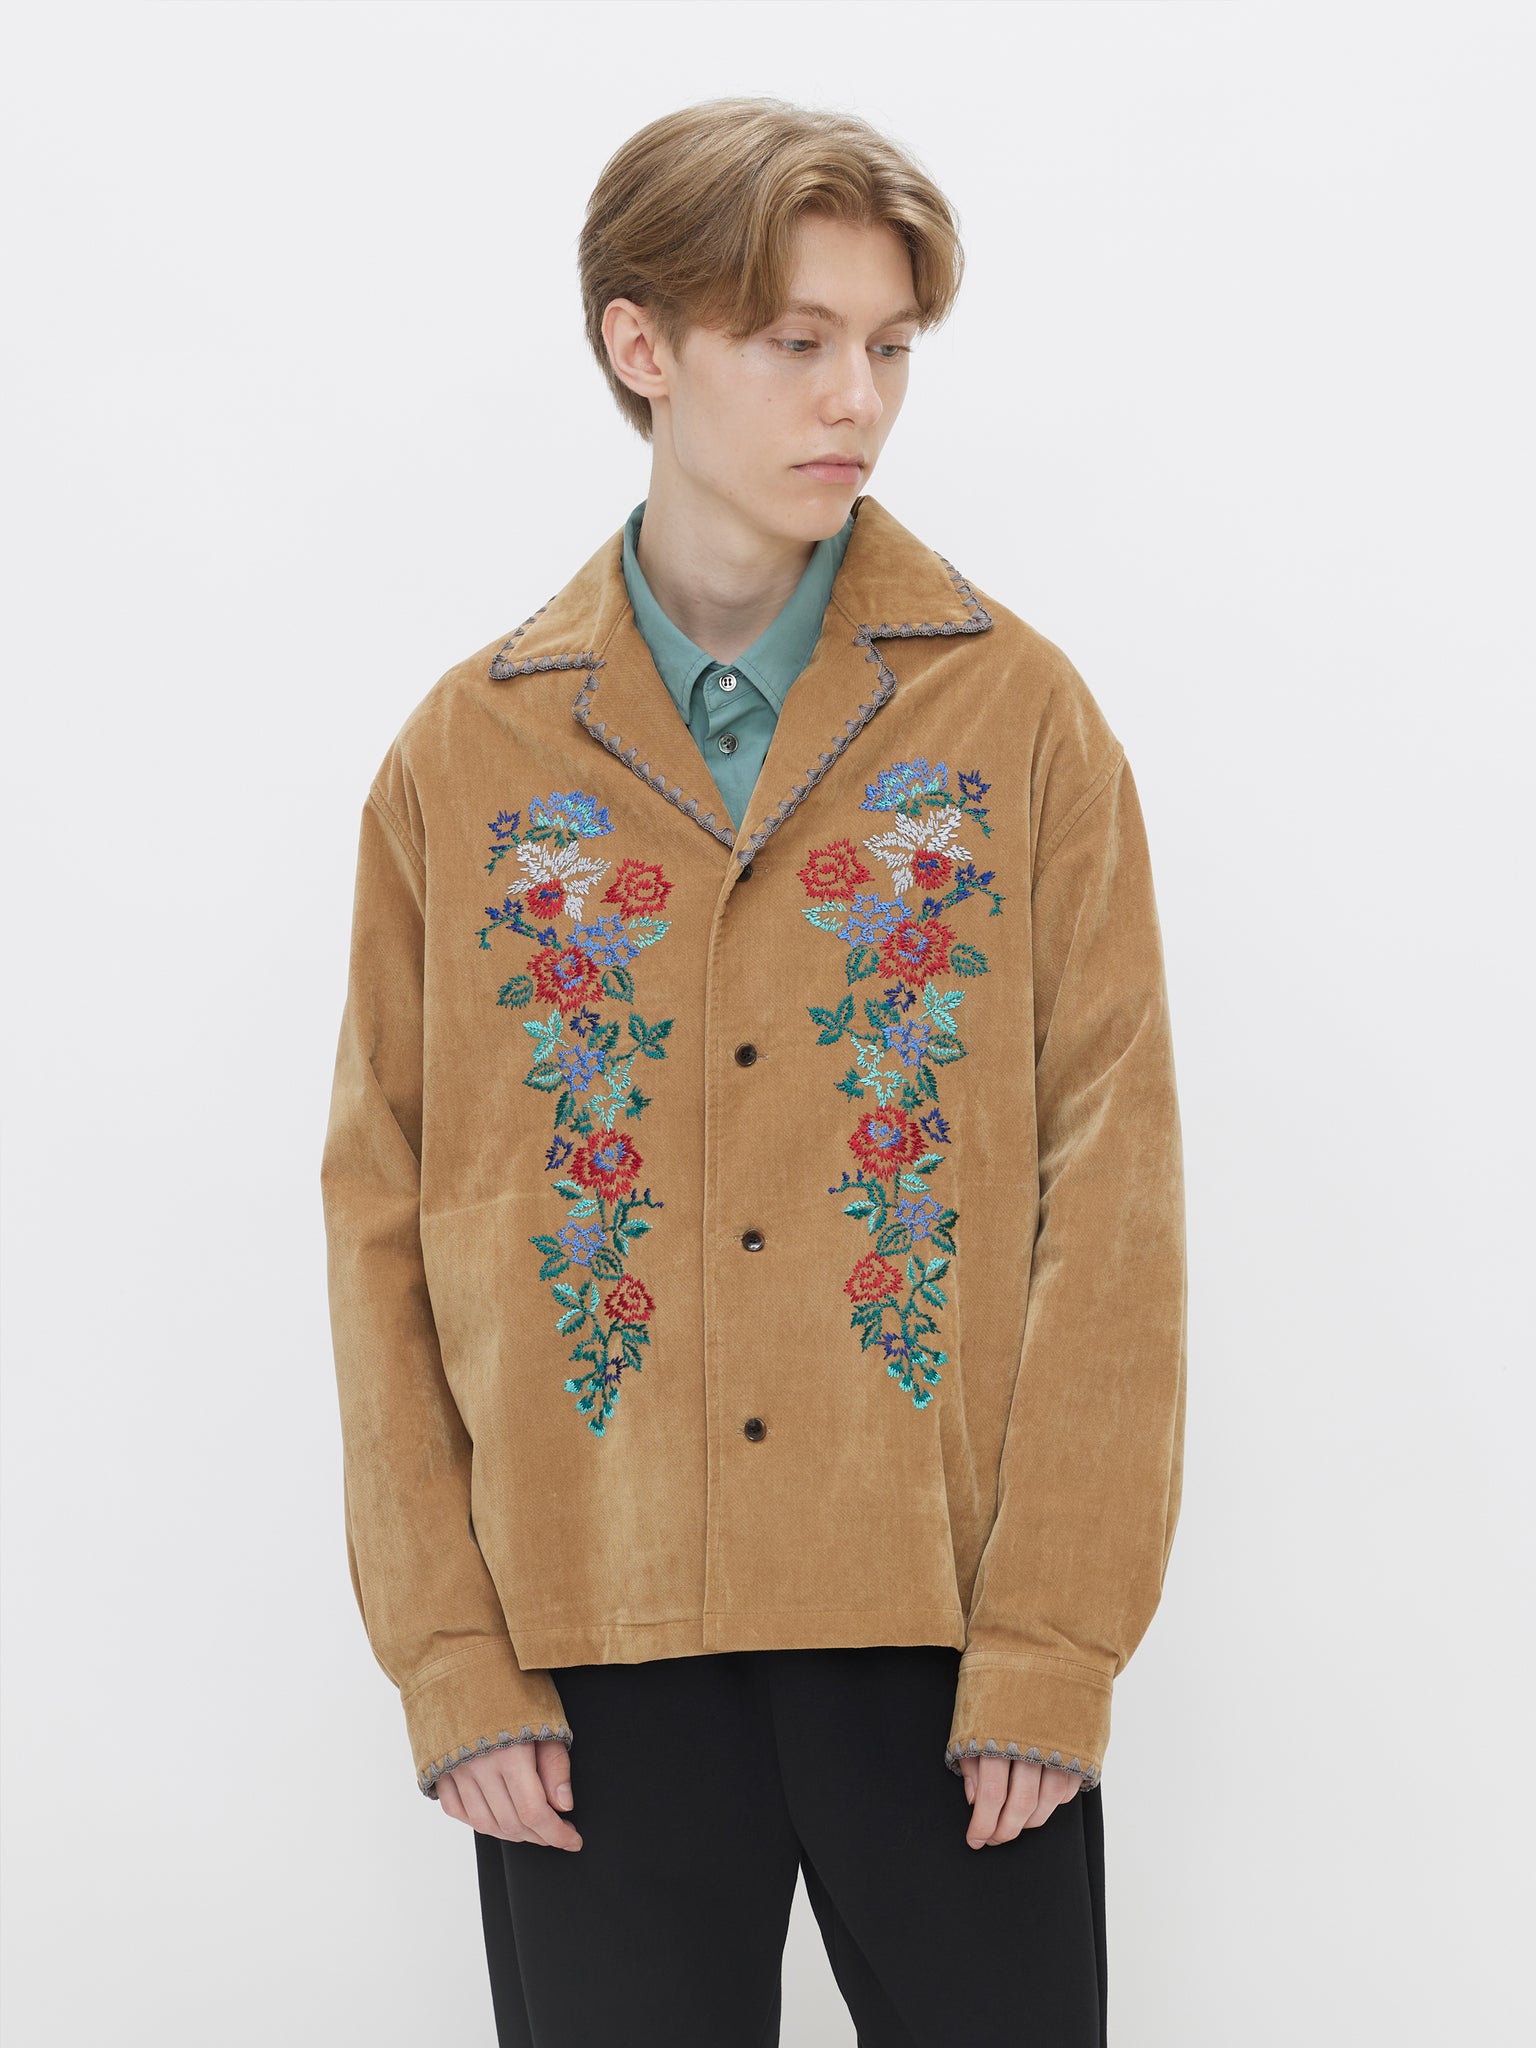 71Michael EMBROIDERED SHIRT COAT | www.darquer.fr